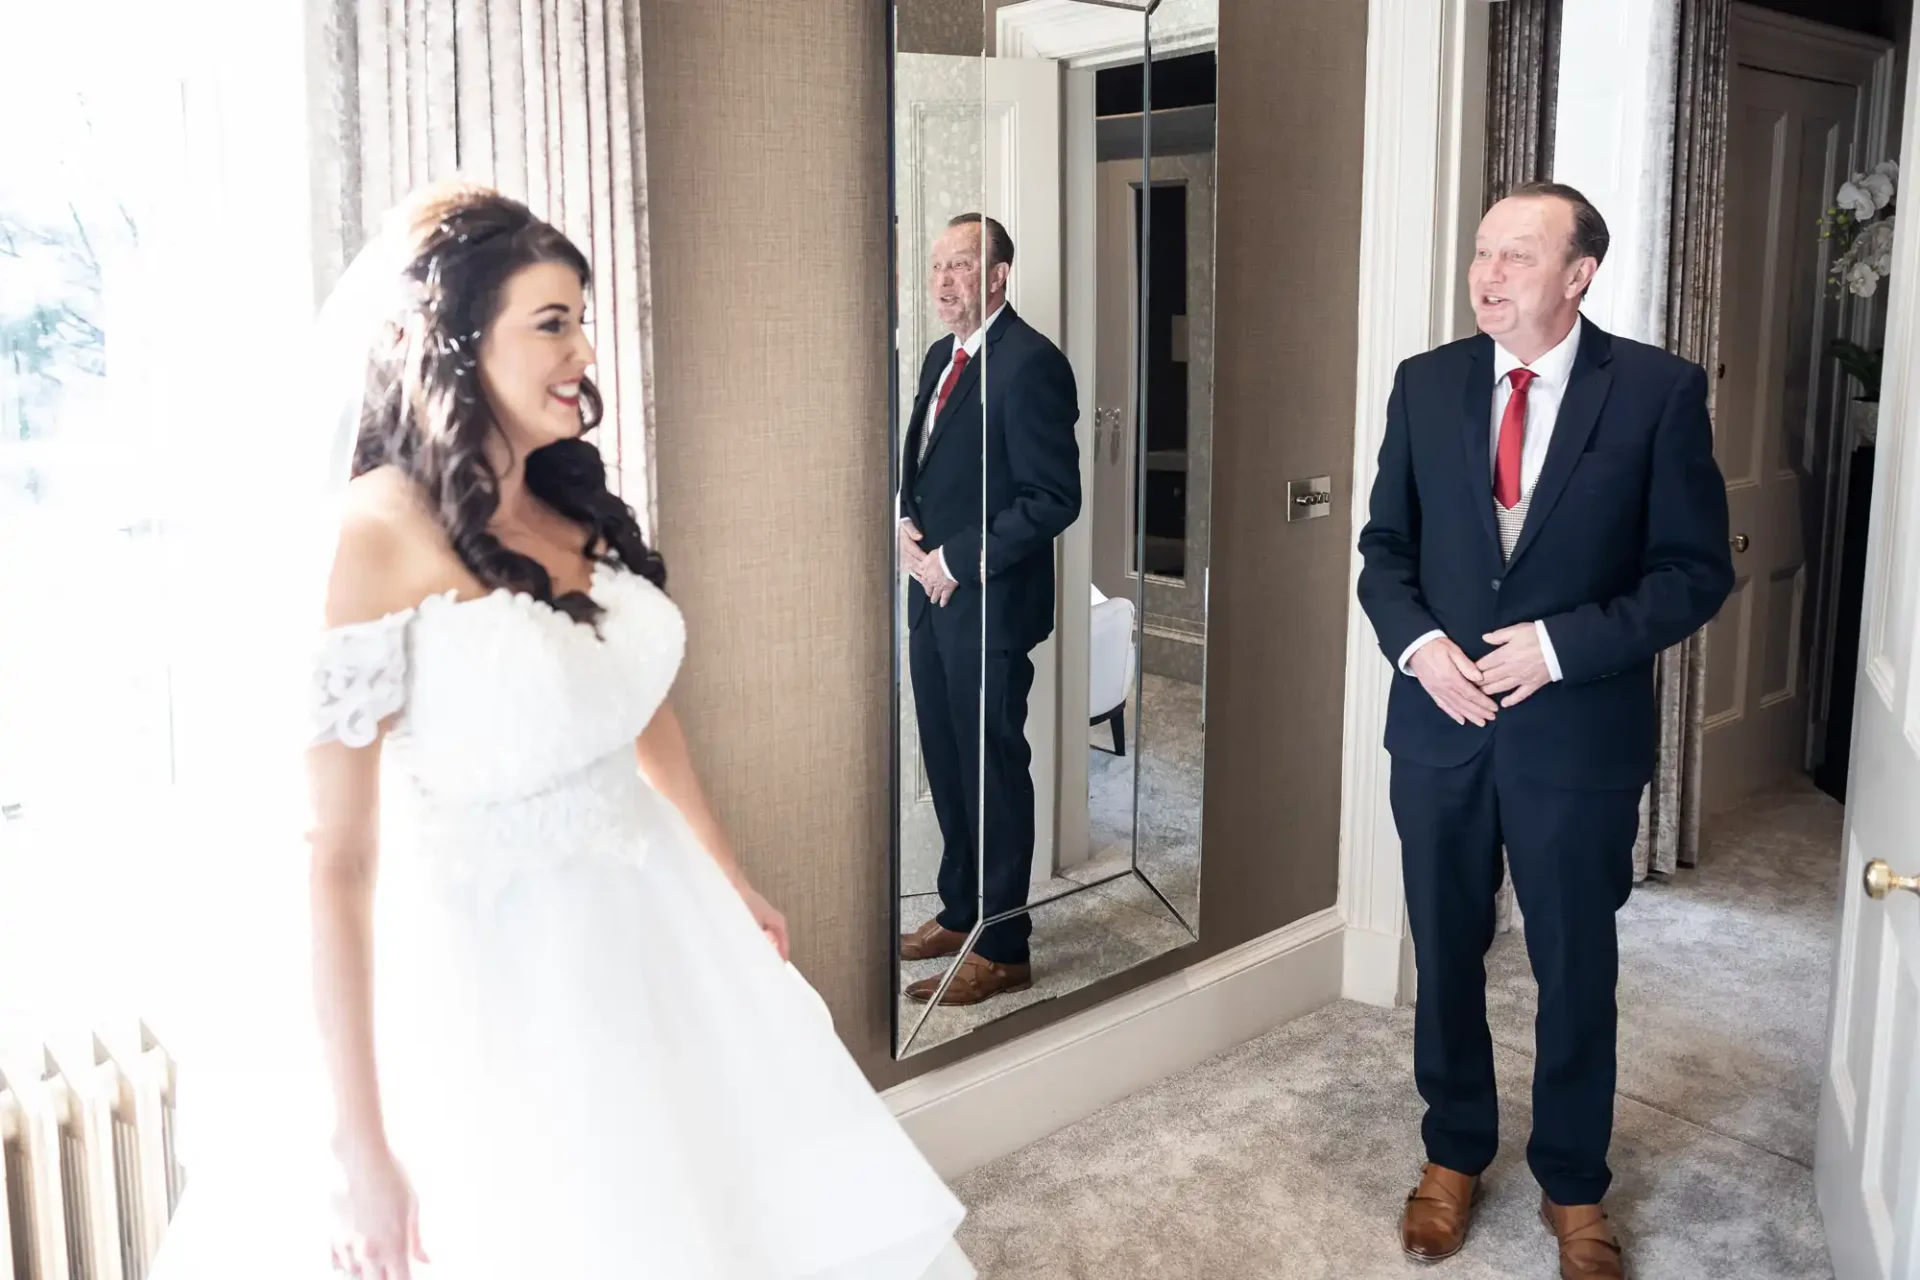 A bride in a white dress smiles at her father, who is reflected in a mirror, in a well-lit room.